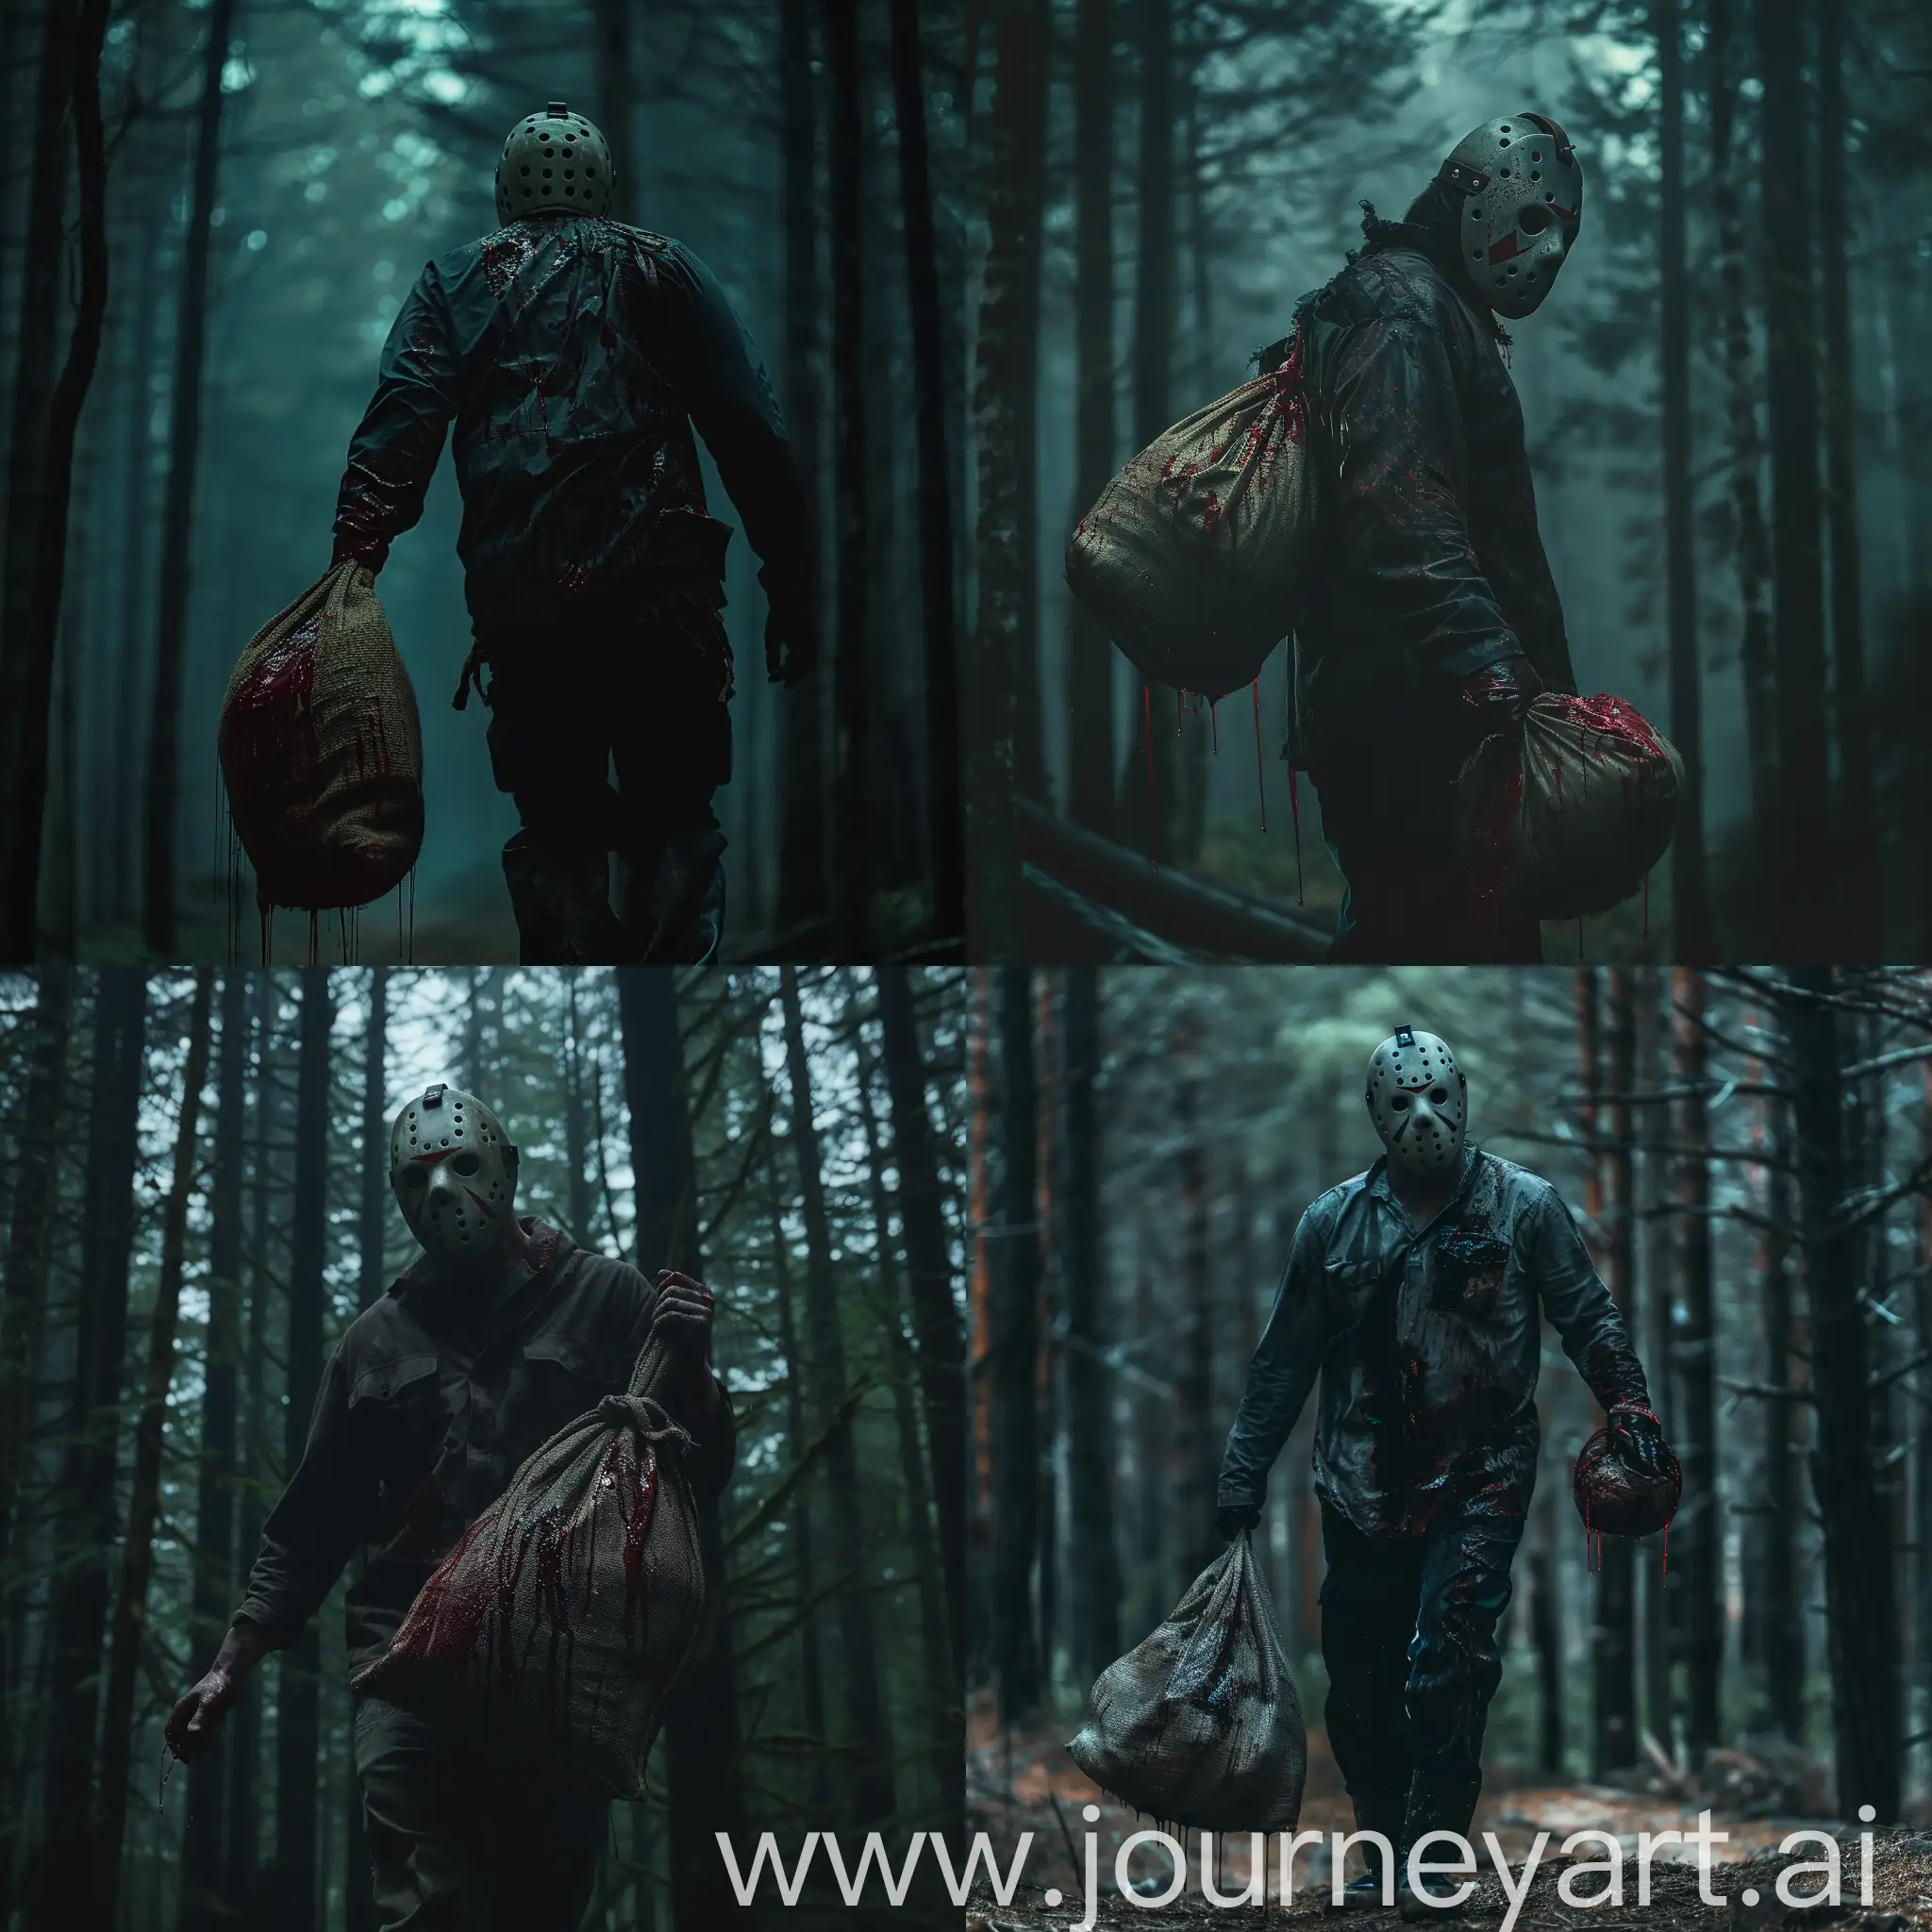 Jason Voorhees carrying a sack which blood dripping out of. In a dark forest. Cinematic shot.